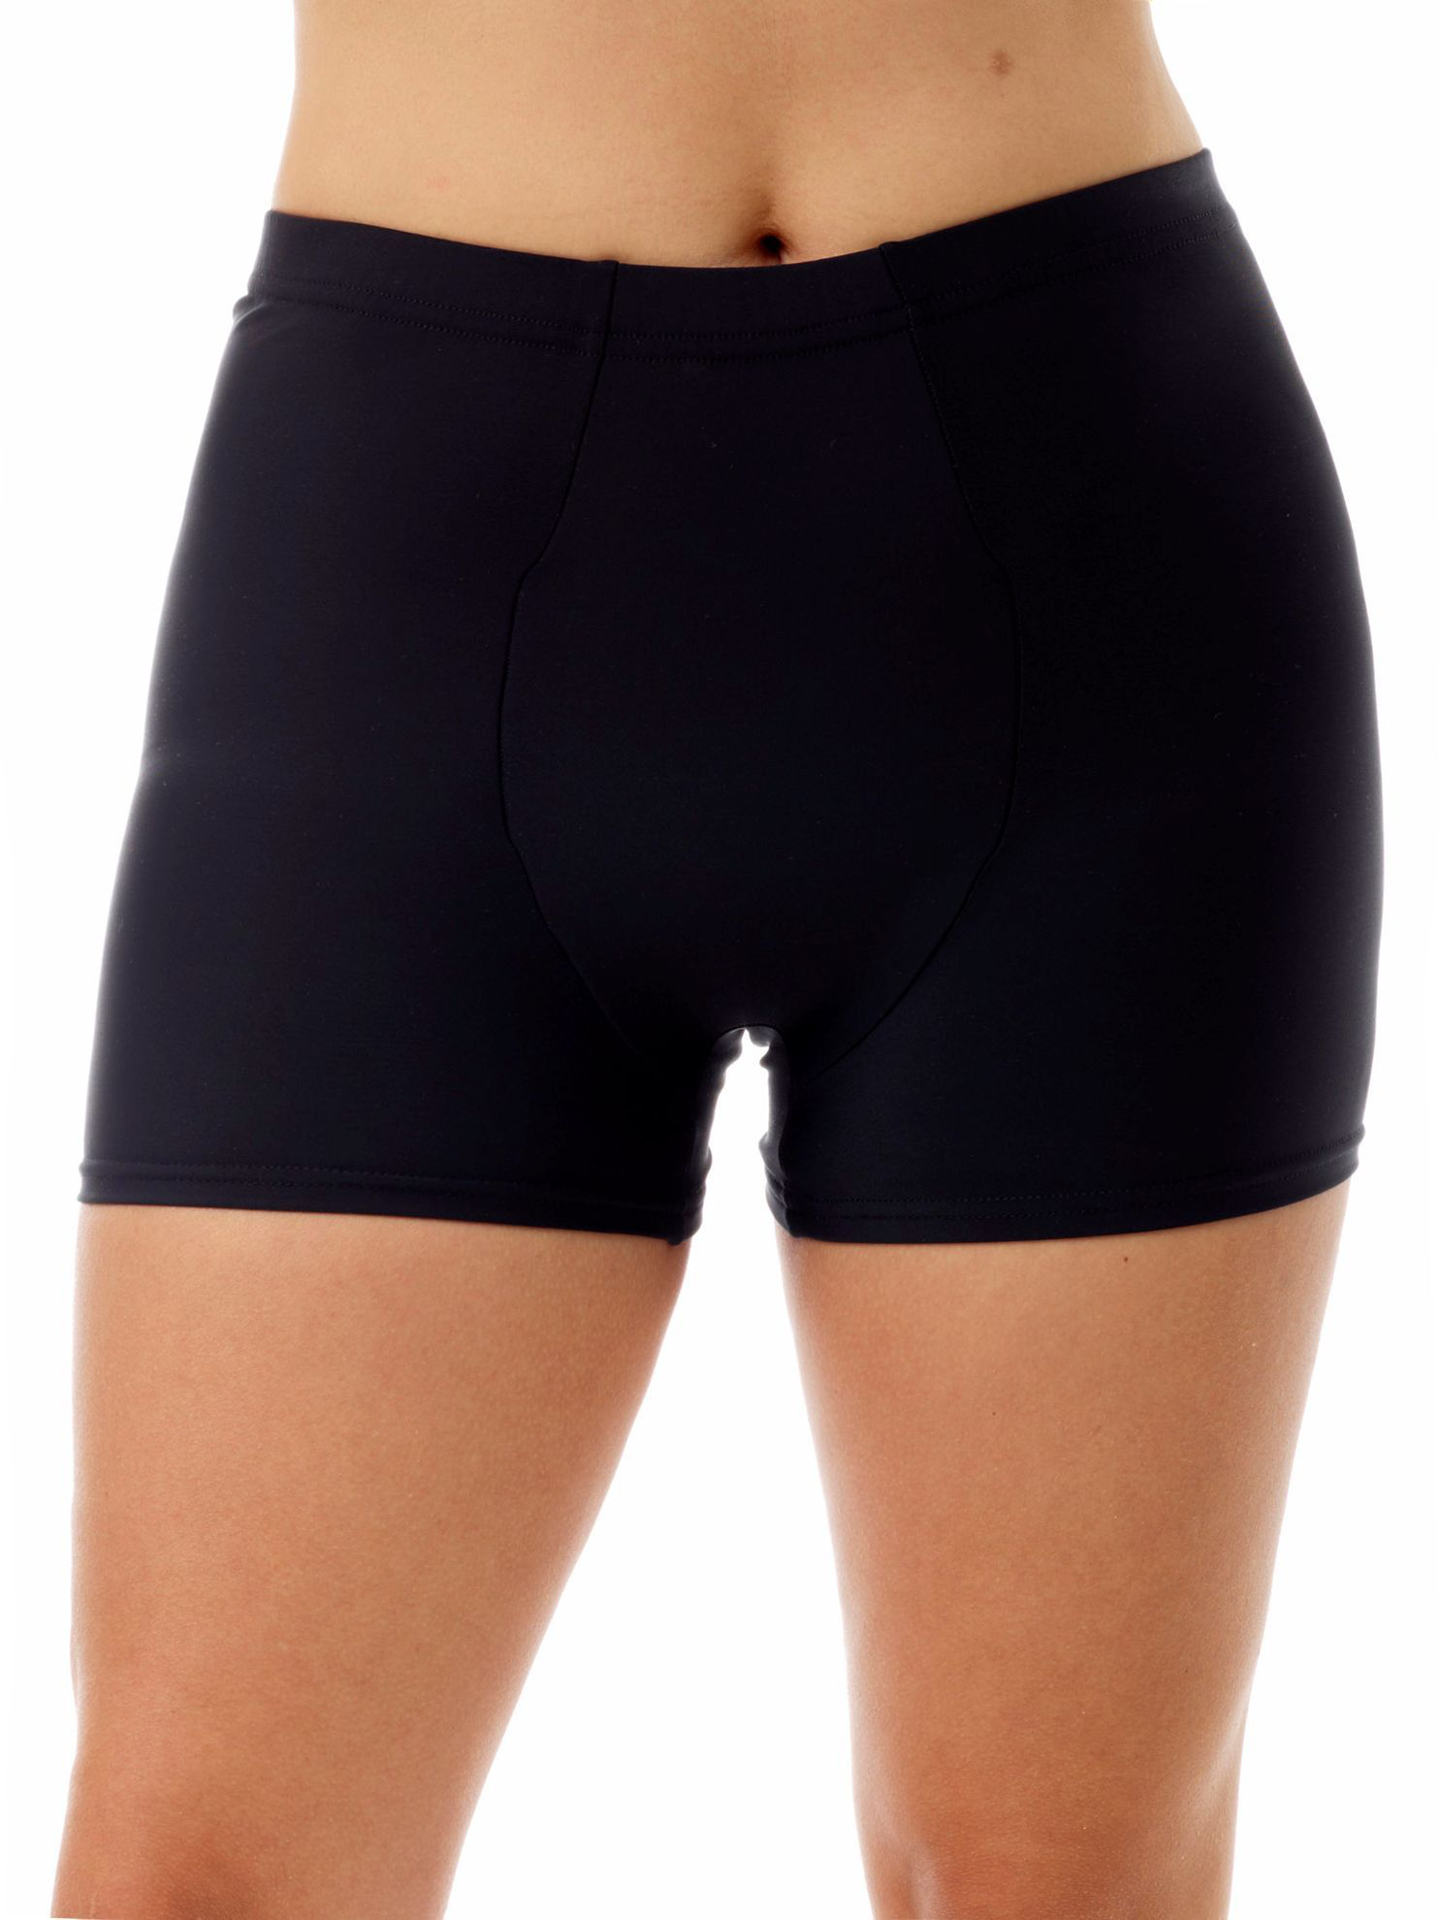 Underworks Women Rear and Hip Padded Brief - Black - S